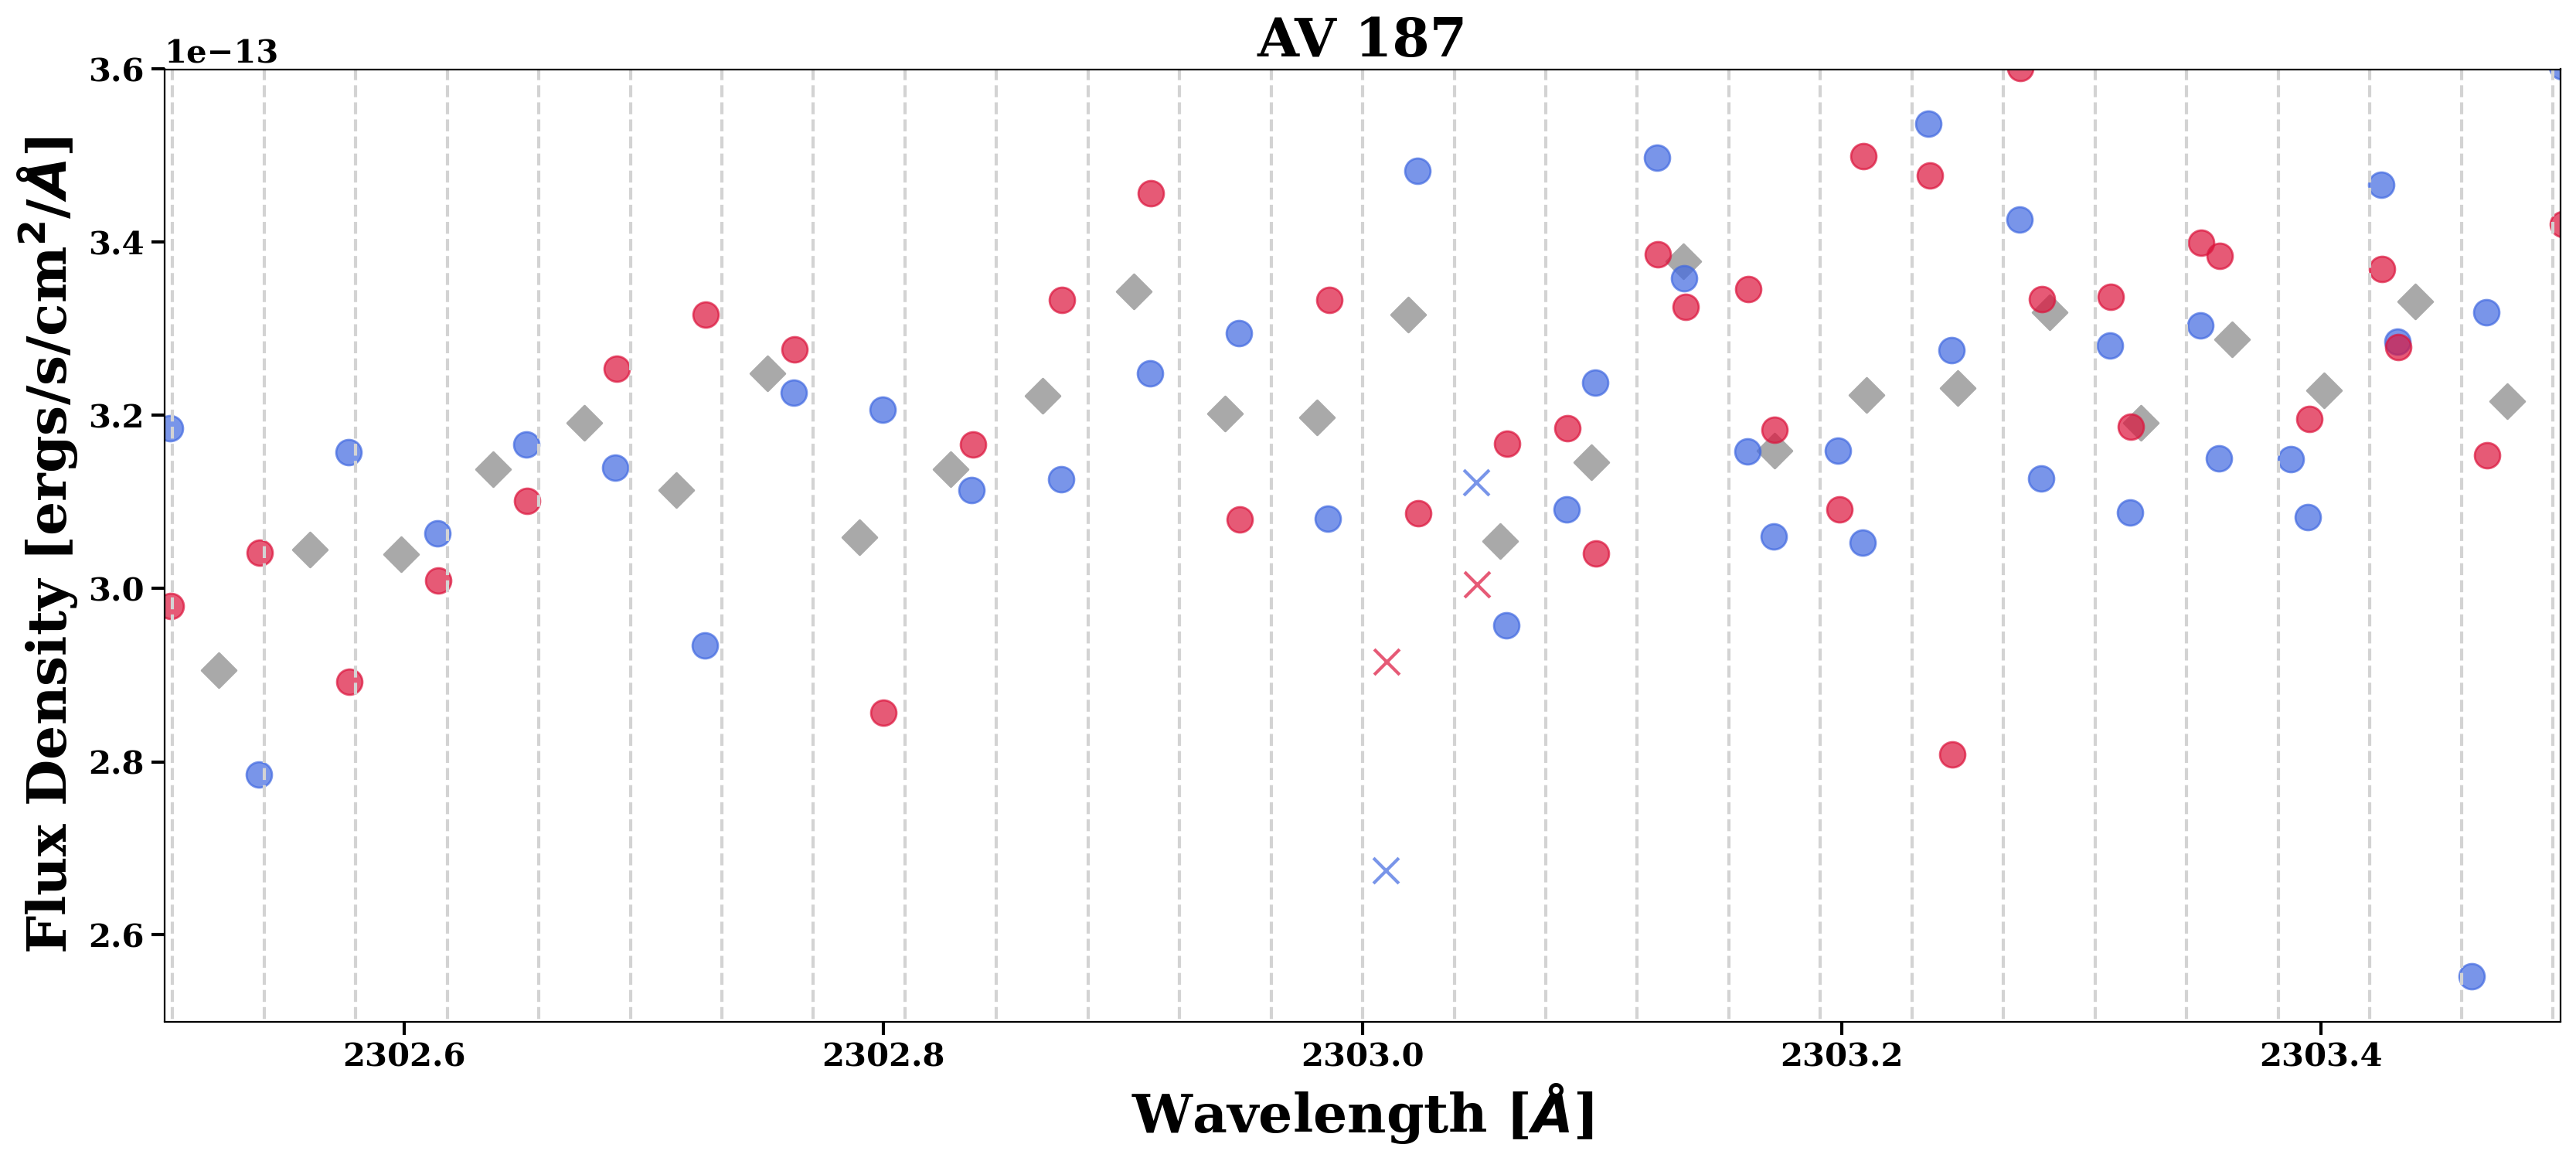 A scatter figure showing the flux density versus wavelength ranging from 2.8x10^-13 to 3.5x10^-13 ergs/s/cm^2/Angstrom.